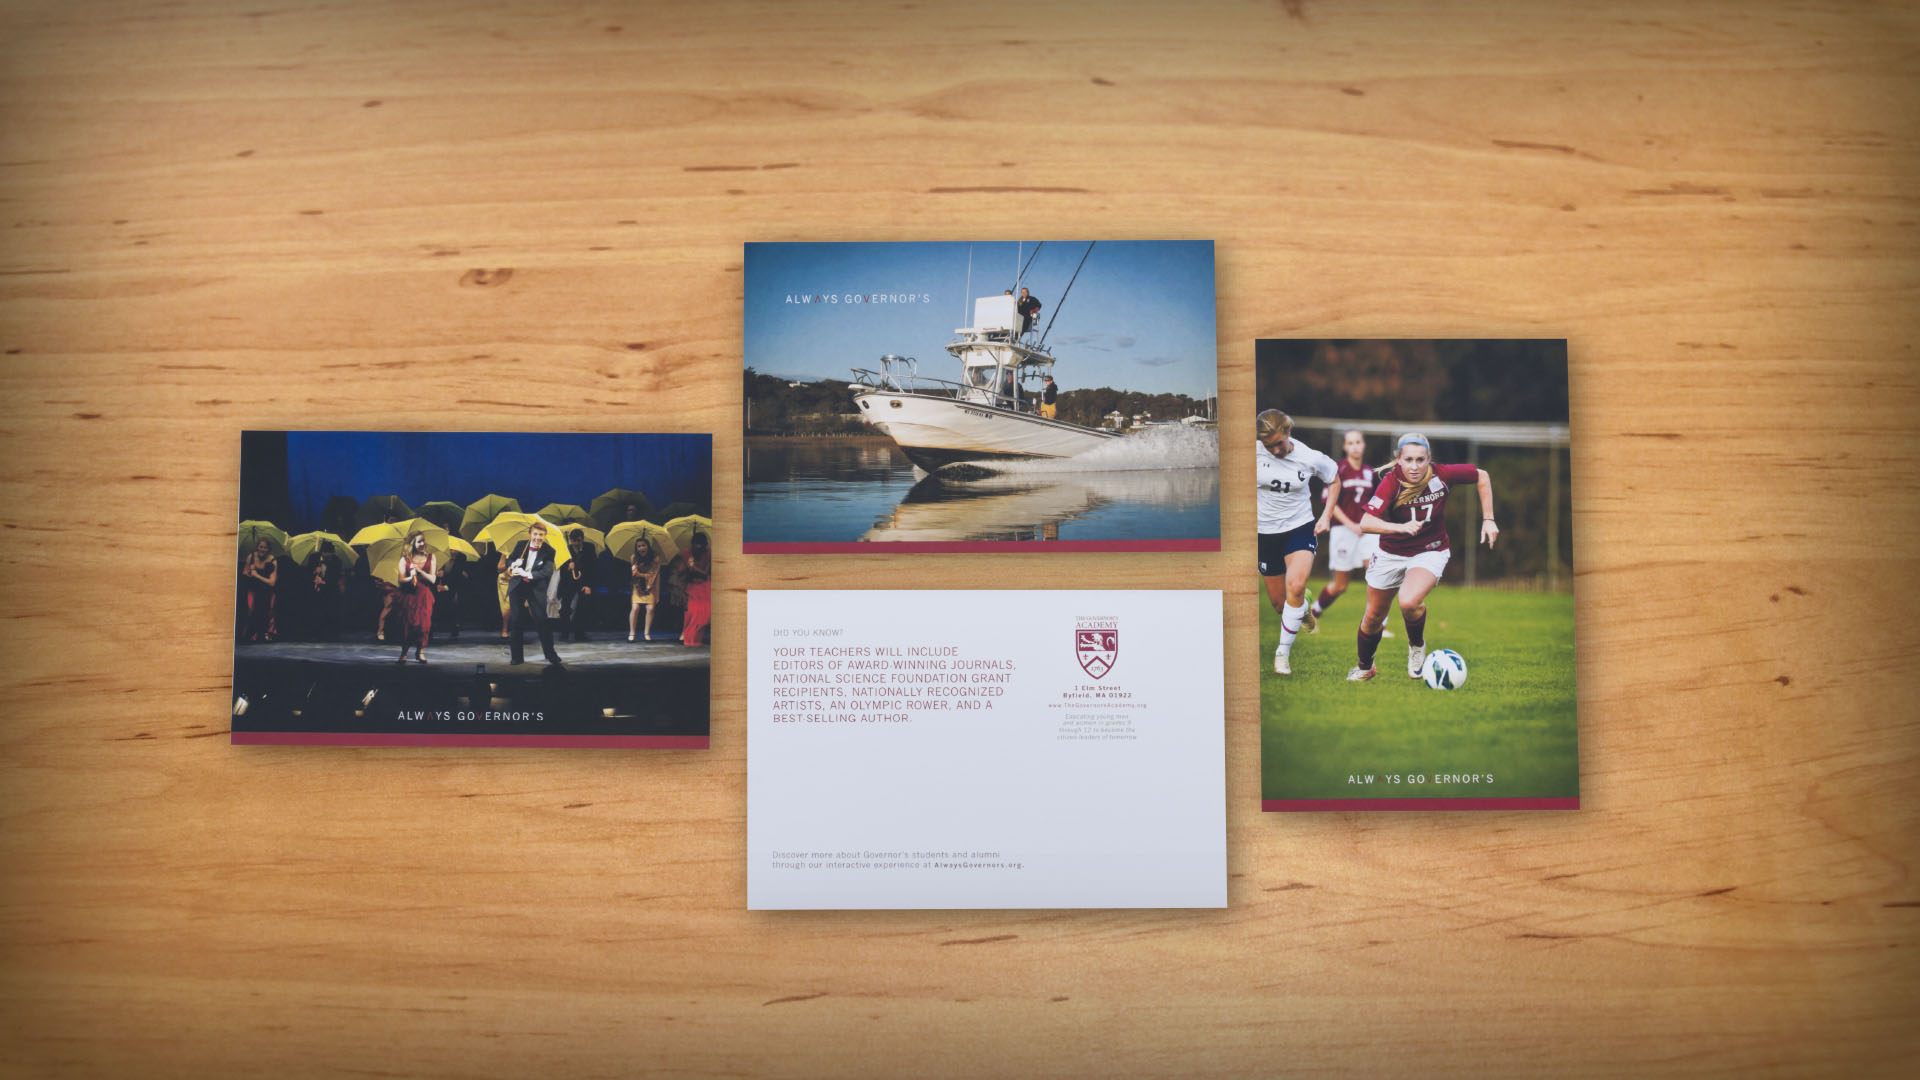 The-Governors-Academy-Branding-Marketing-Admissions-Campaign-Postcards-14.jpg